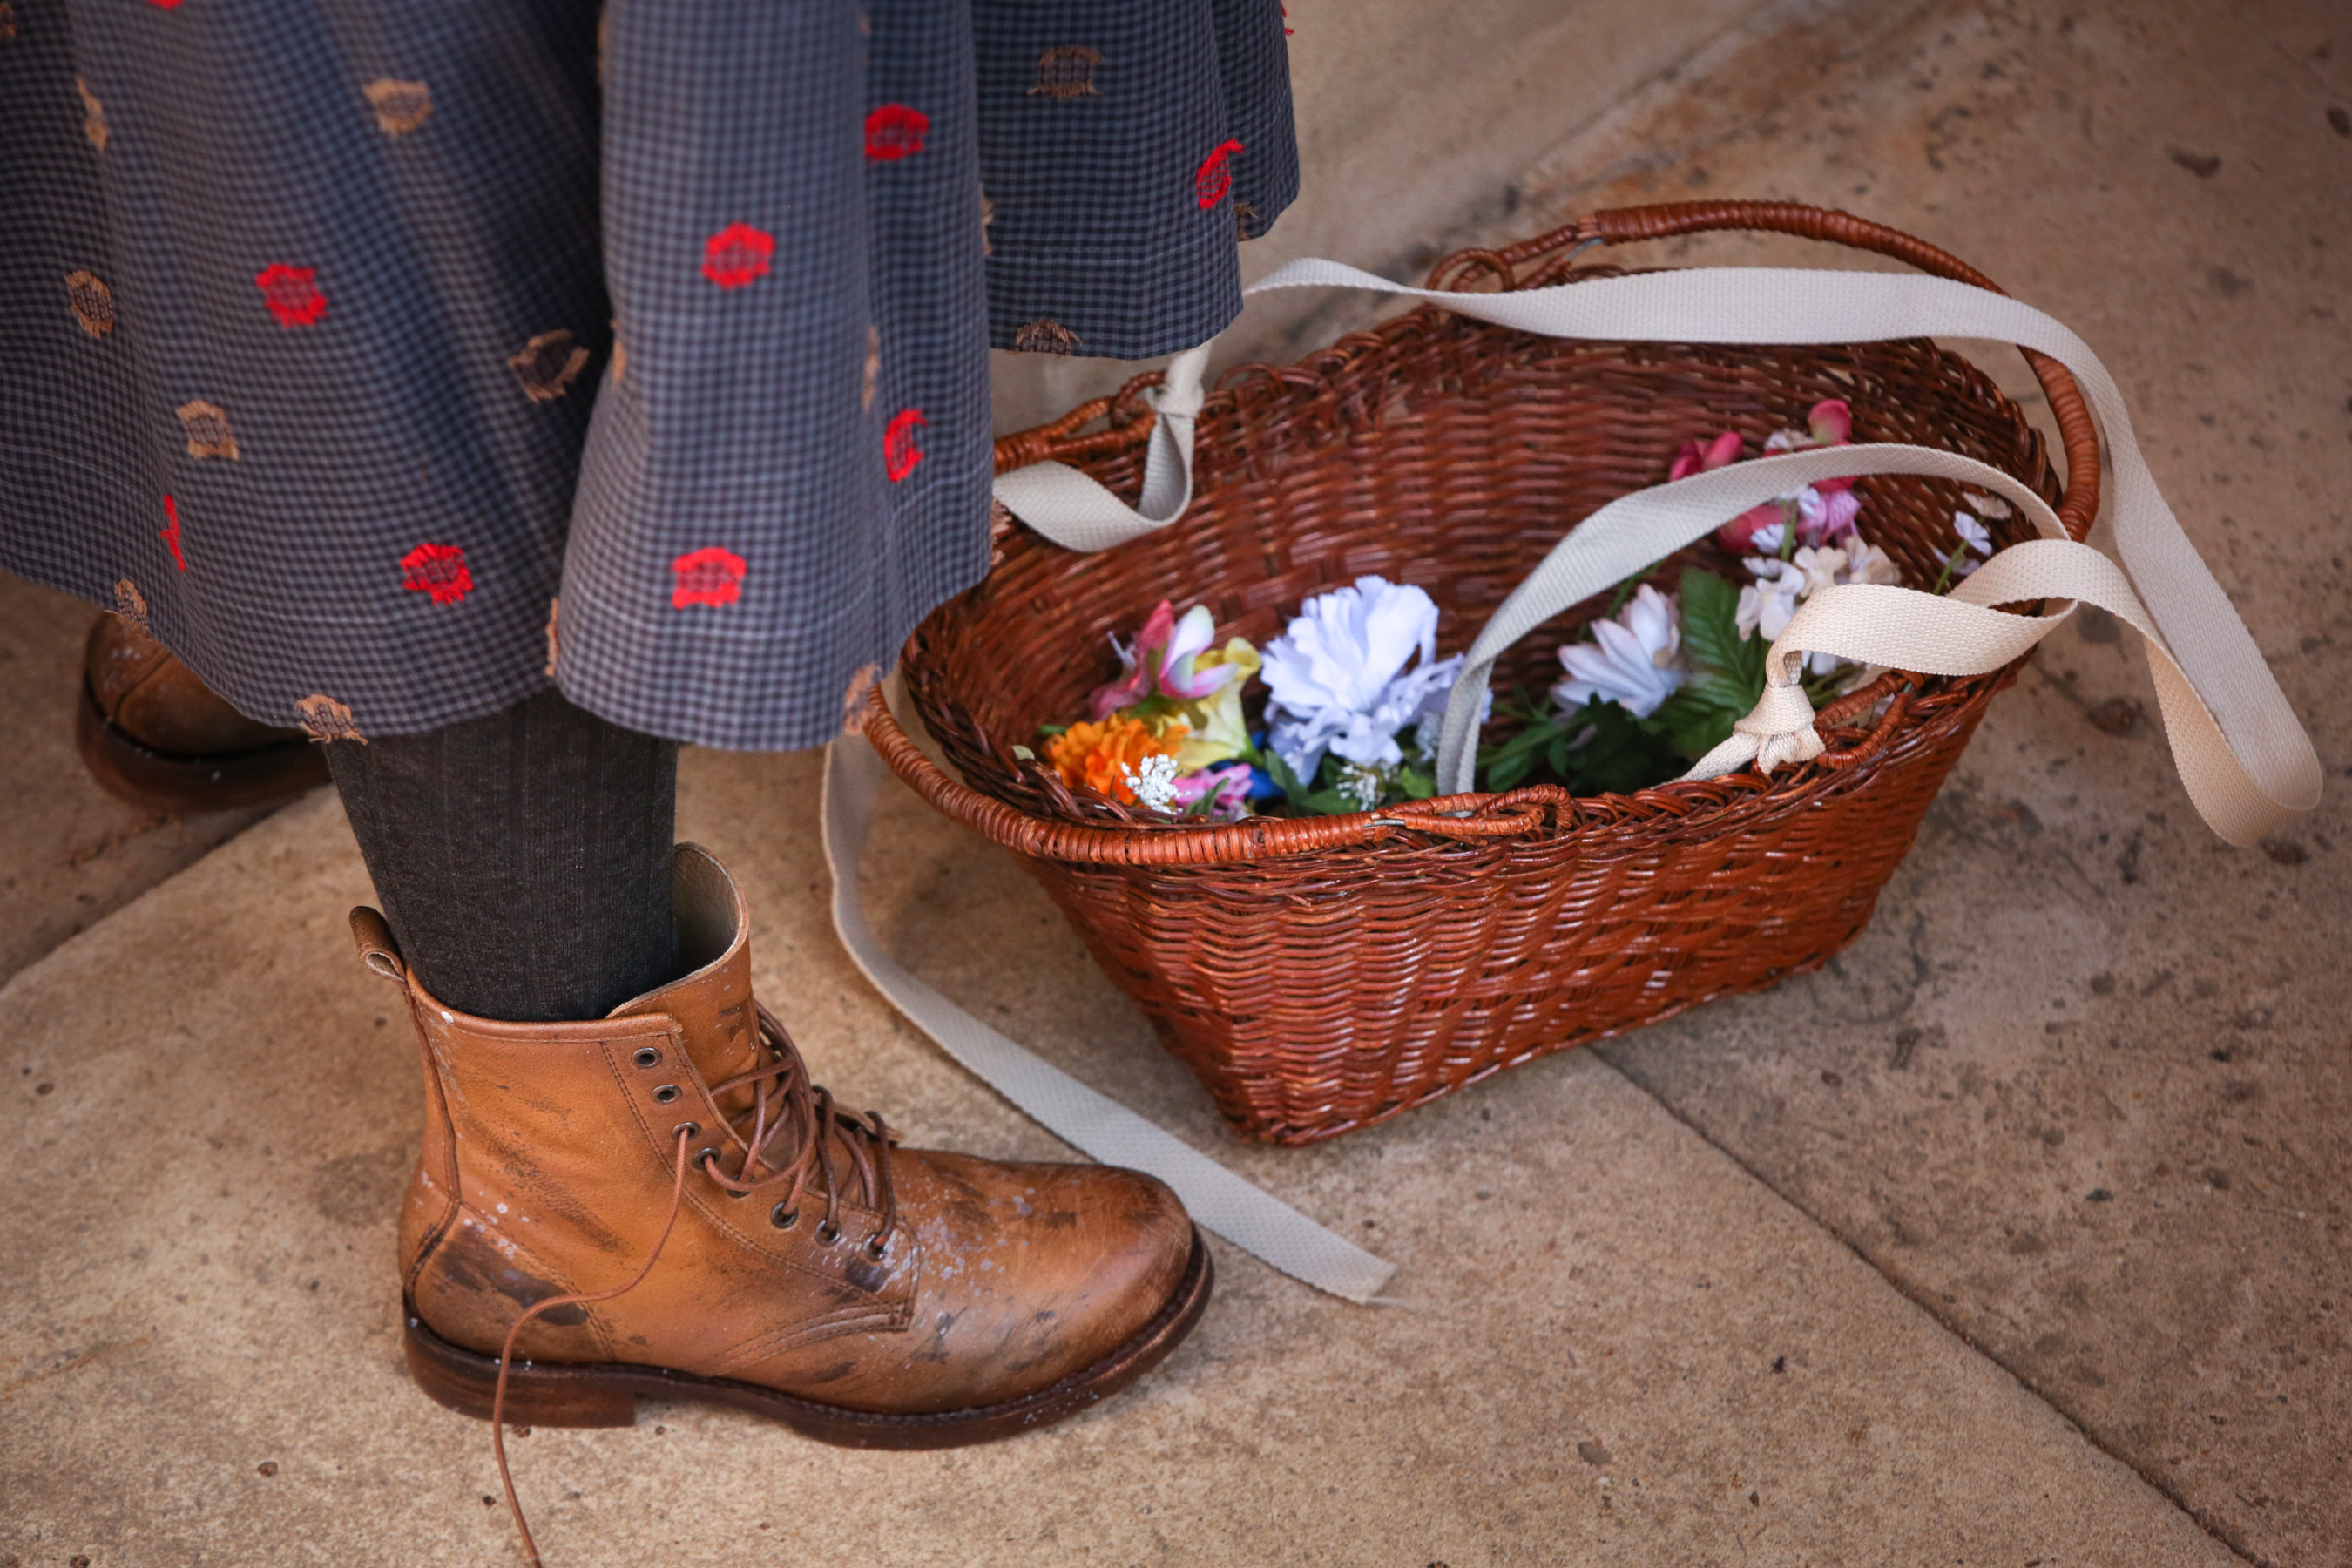 detail photos of actor in a rough skirt 1900's boots with a flower basket at her feet